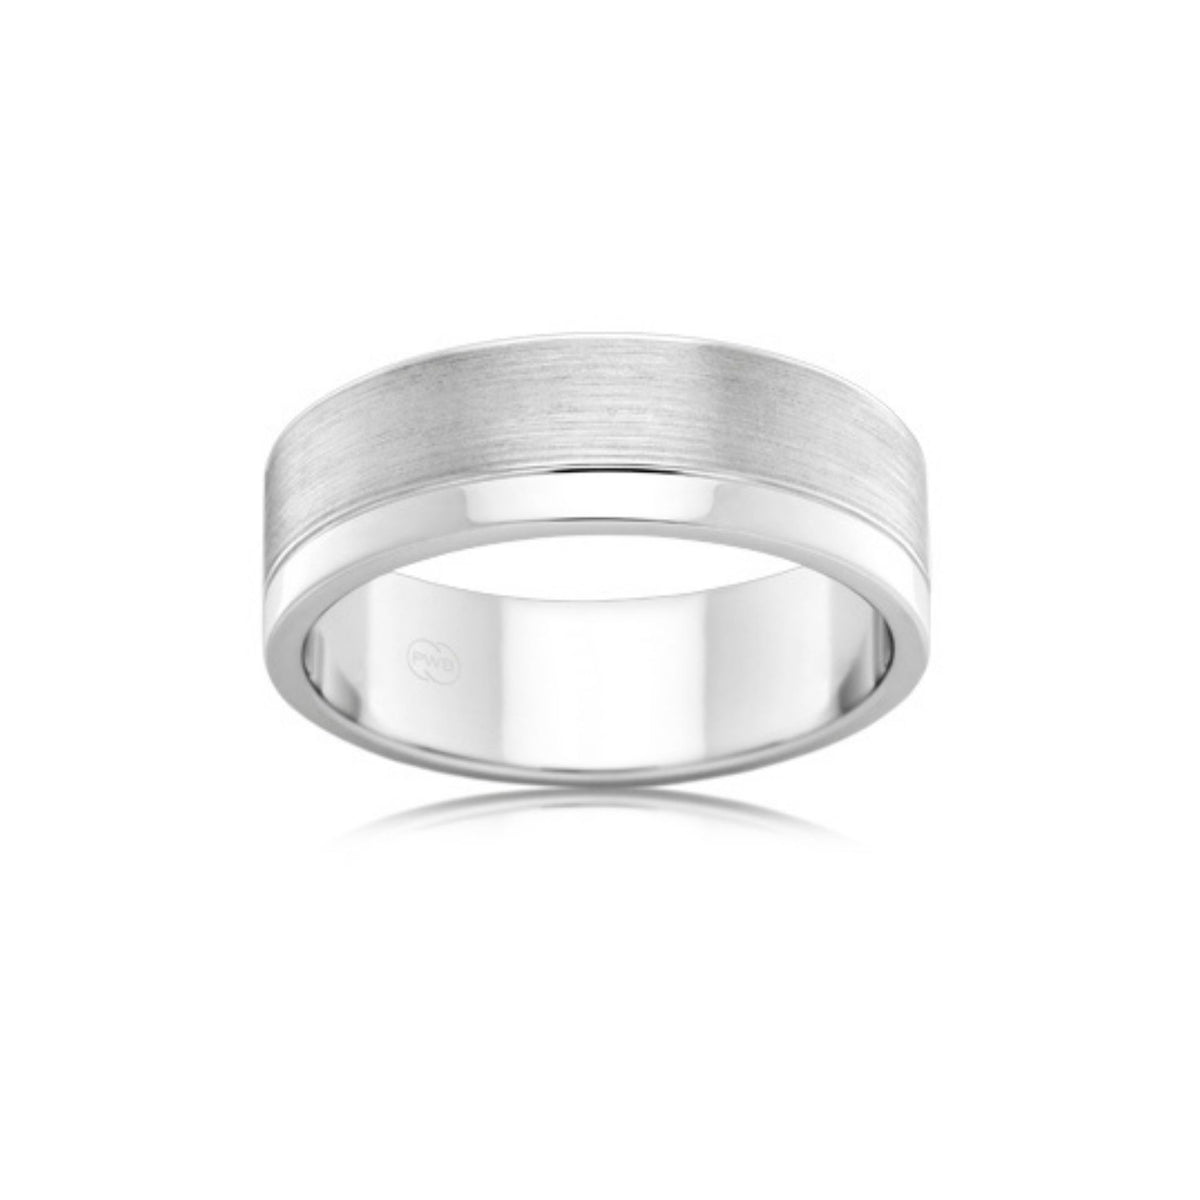 Parallel Grain White Gold with Single Smooth Edge Wedding Ring - Orsini Jewellers